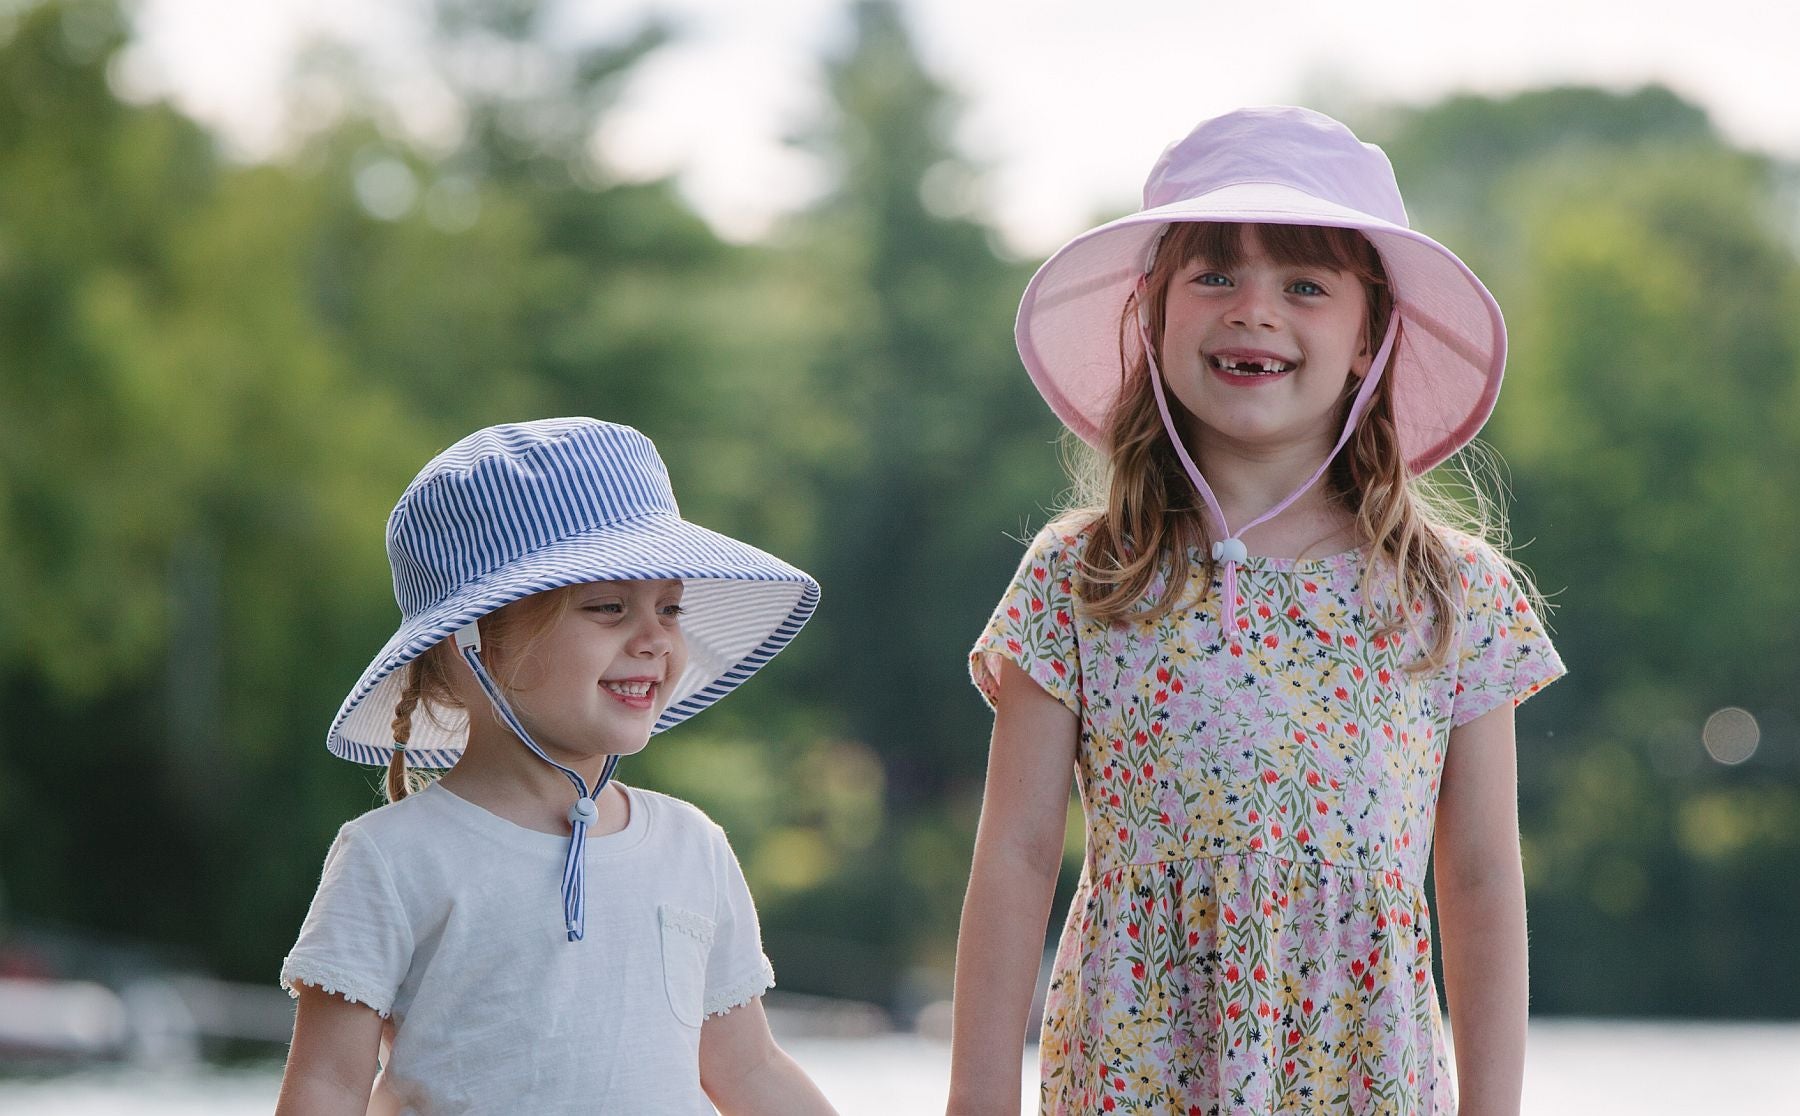 Kids Summer Hats Tested and Rated UPF50+ Sun Protection-Wide brim sunbaby hat, active wear camp hat-linen hats-cotton print hats-organic cotton hats-solar nylon hats-machine washable-chin ties keep hat safely on head-Made in Canada by Puffin Gear